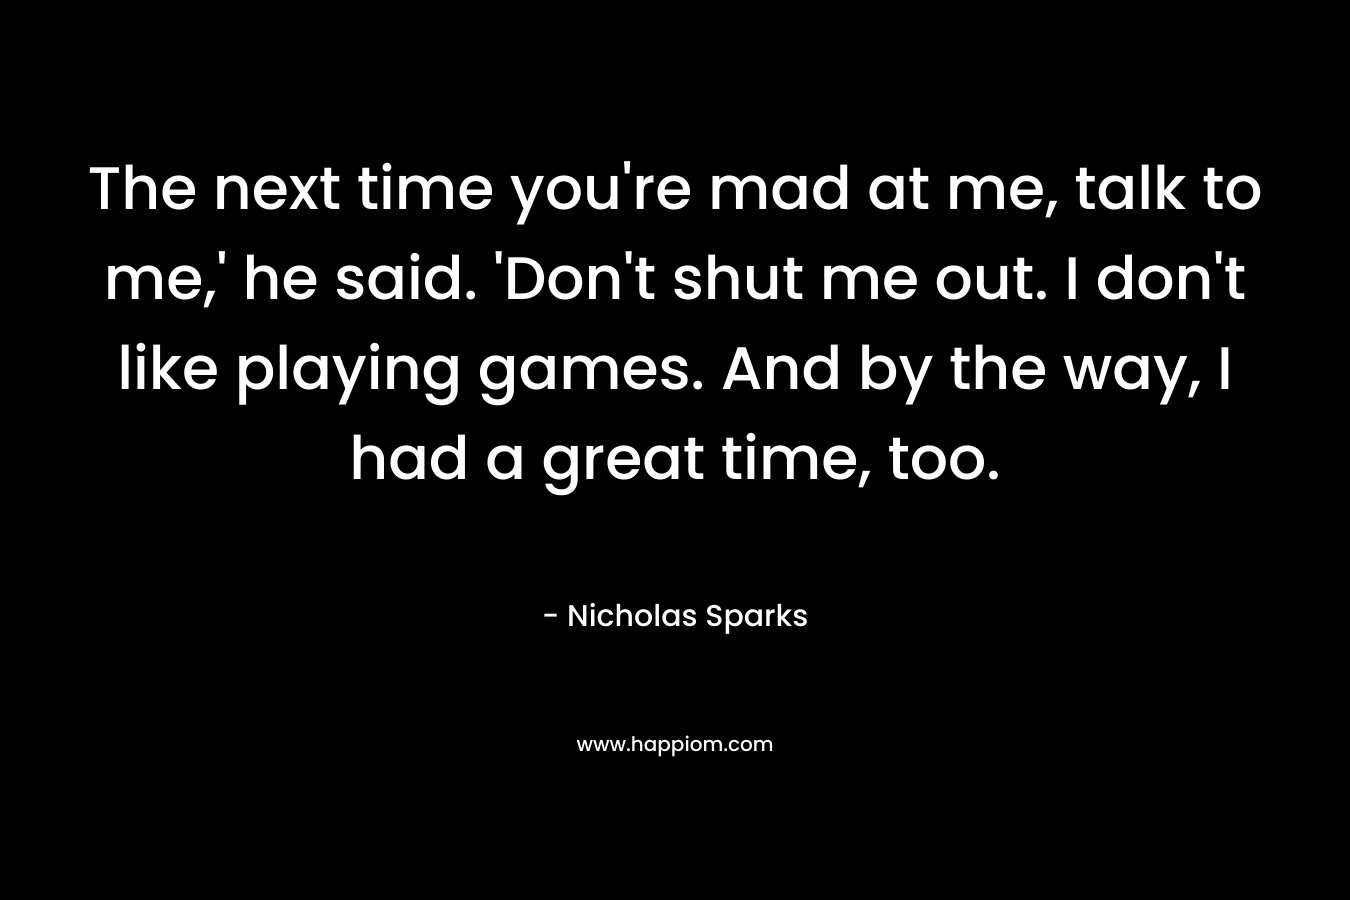 The next time you're mad at me, talk to me,' he said. 'Don't shut me out. I don't like playing games. And by the way, I had a great time, too.